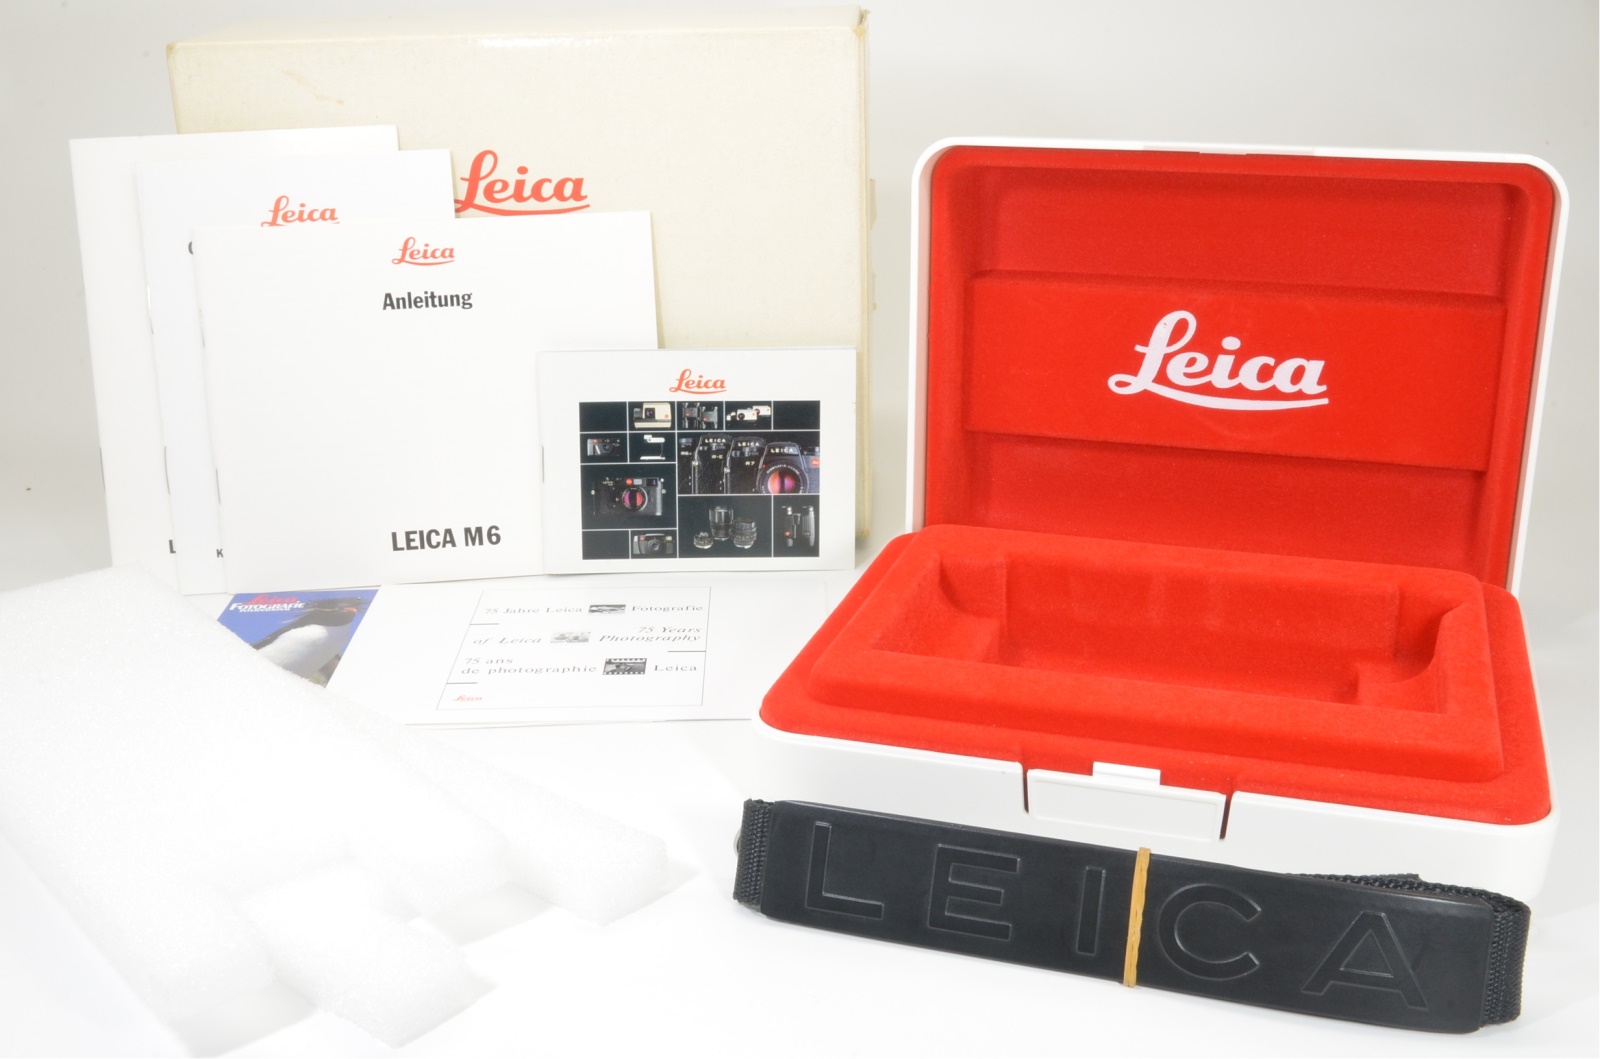 leica m6 empty box 10414, plastic case, strap, and documents from japan